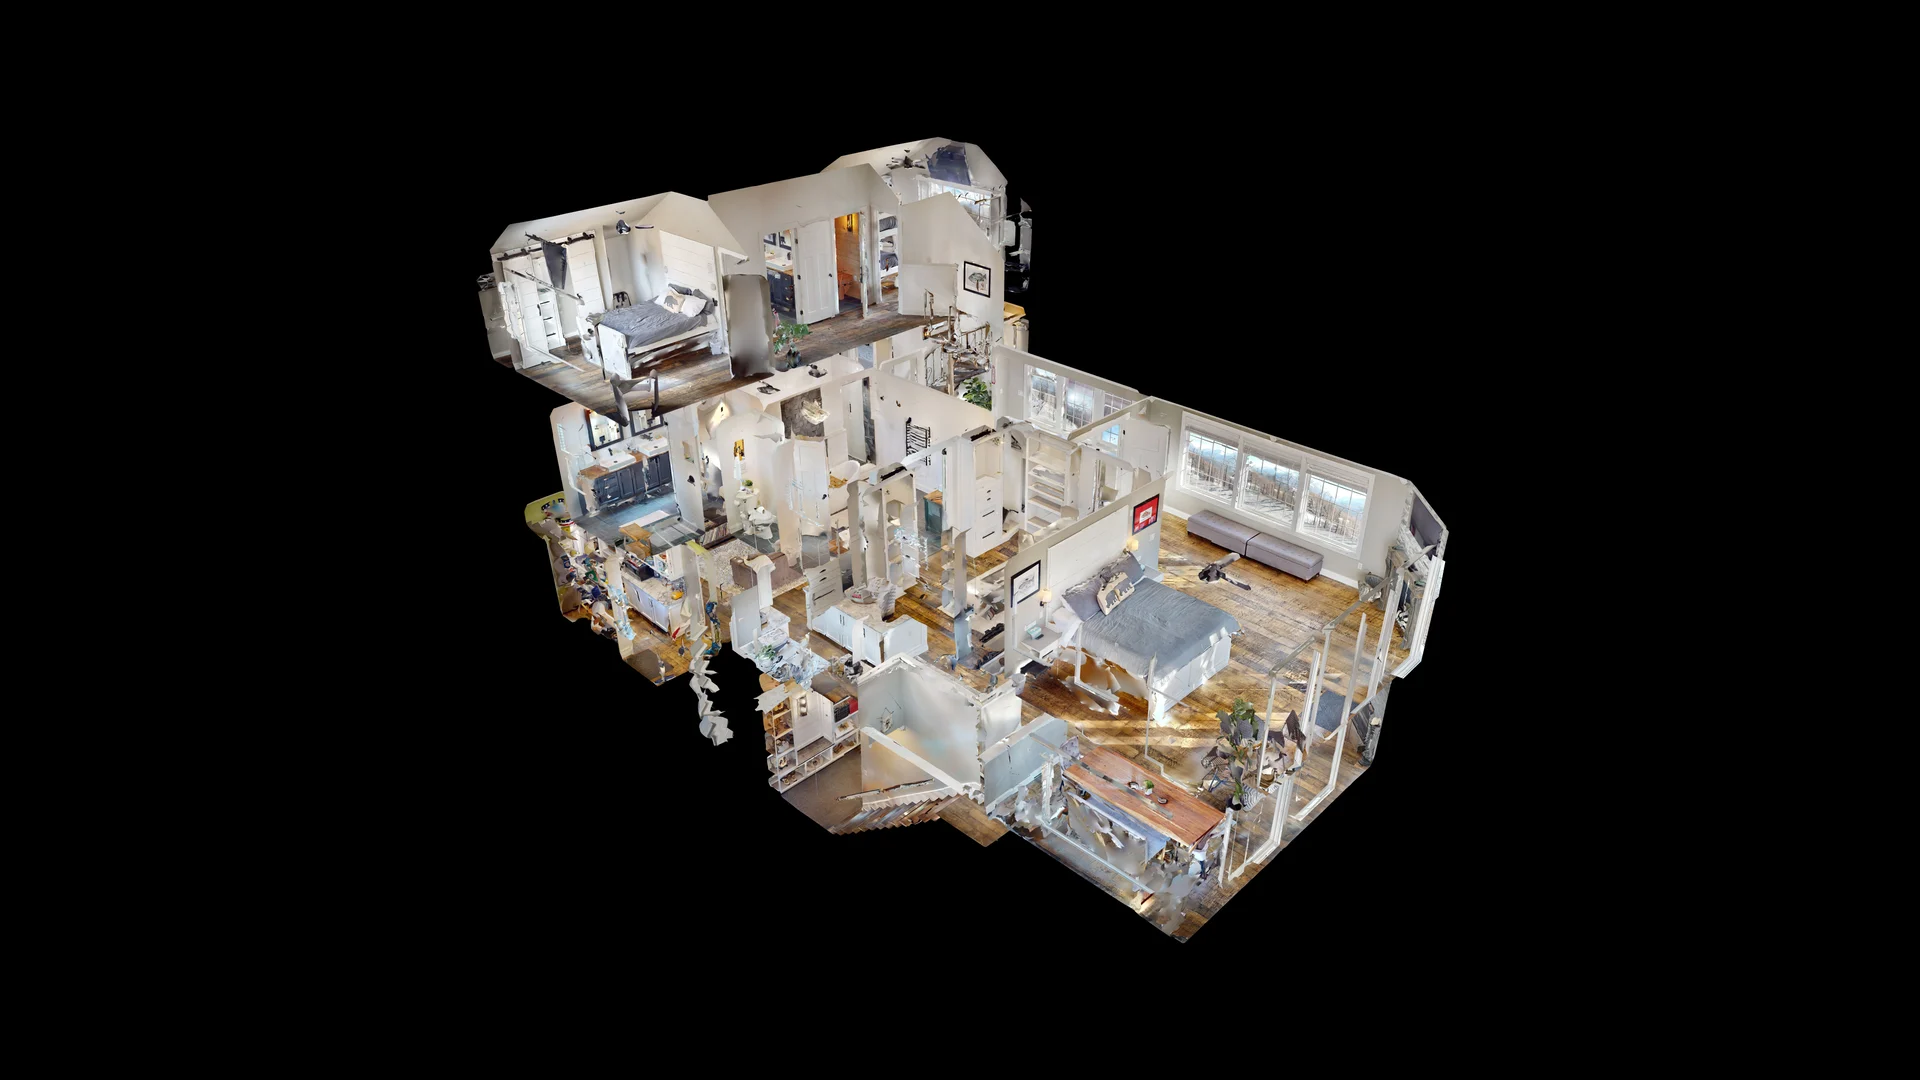 Dollhouse view of 3-story home.  3D model created by Matterport system.  State of the art virtual property tours.